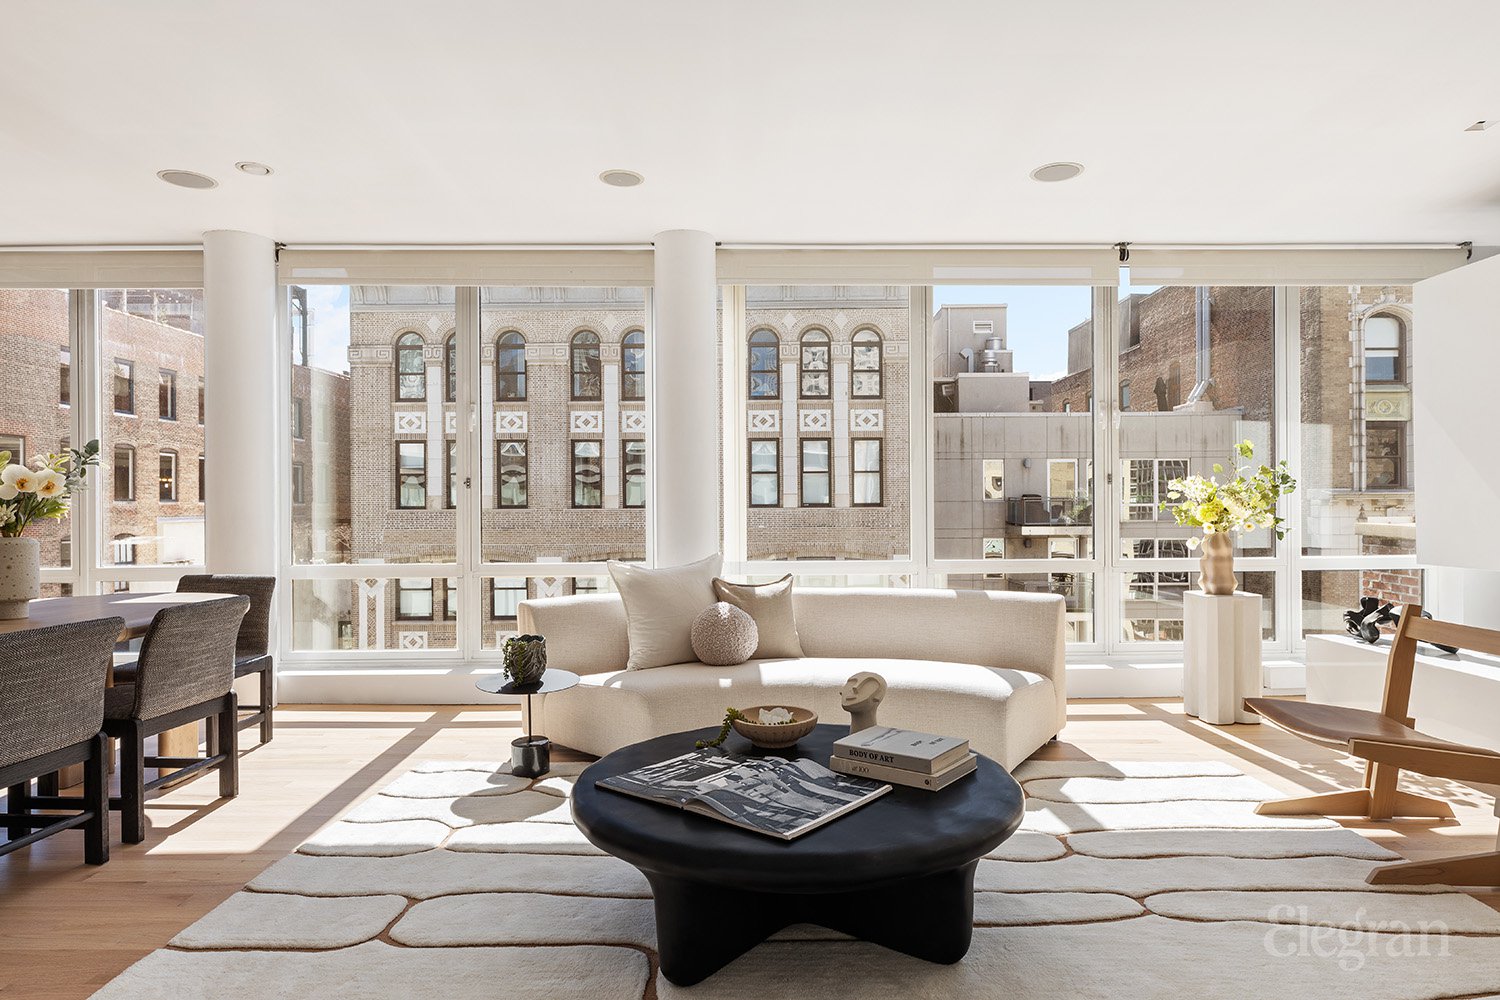 133 West 22nd Street Ph-B, Chelsea, Downtown, NYC - 3 Bedrooms  
3.5 Bathrooms  
5 Rooms - 